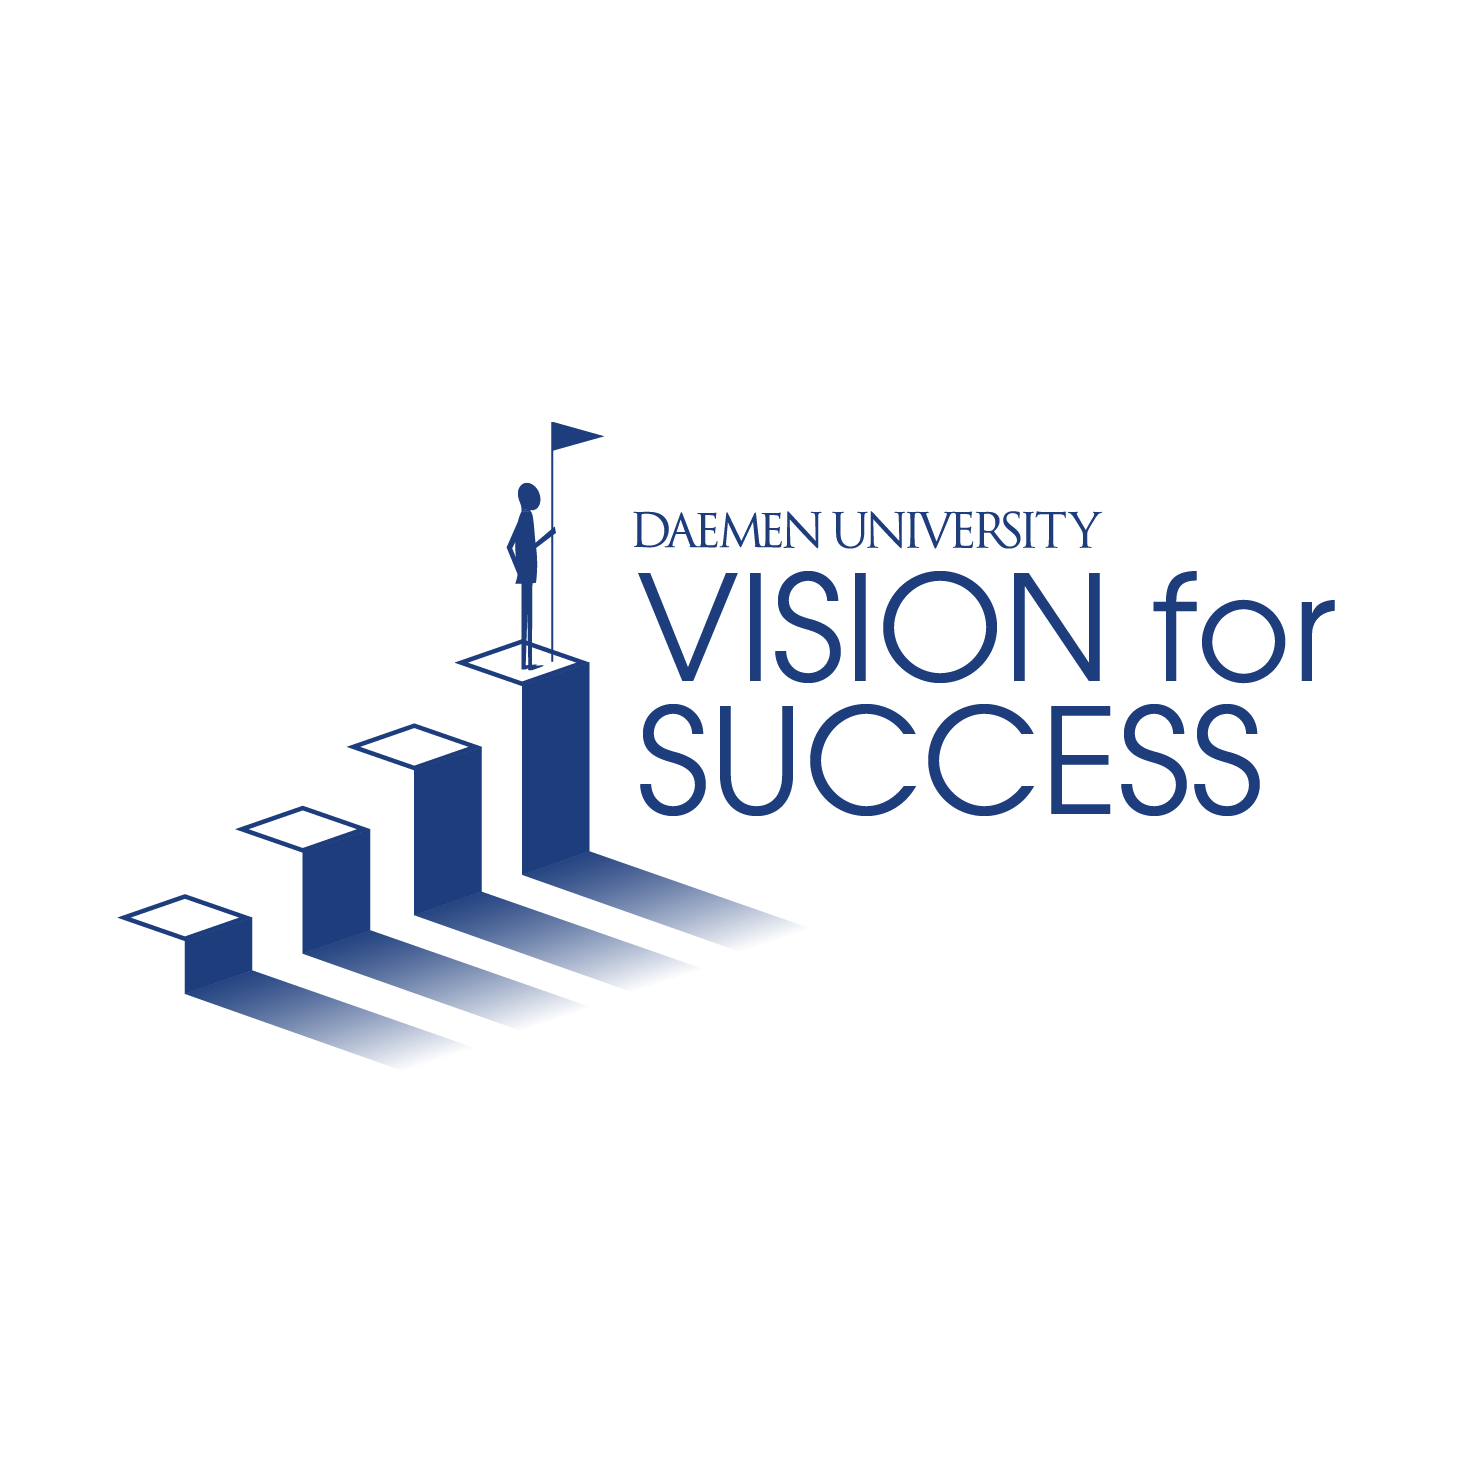 ˿Ƶ Vision For Success blue stairs with person-like image a top holding flag